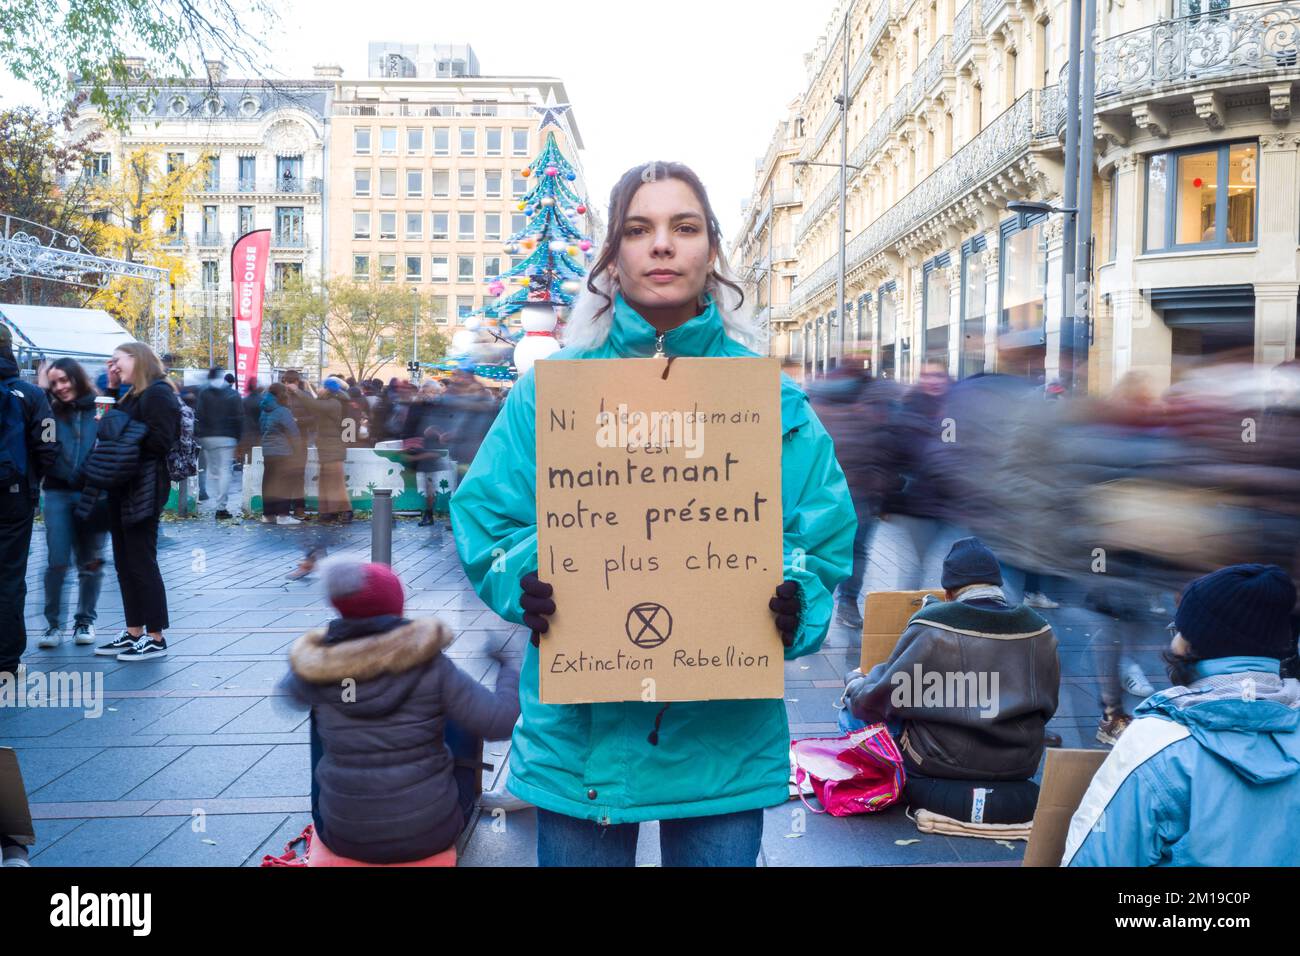 Toulouse, France. 11th Dec, 2022. A citizen standing in the middle of moving passers-by with a placard, Not yesterday, not tomorrow, now is our dearest present. XR Extinction Rebellion. Sitting / medit action, non-blocking, to cogitate and make cogitate on overconsumption during Christmas. in front of agitation and frenzy, calm and serenity; in front of massive consumption, happy sobriety; in front of injustices and social inequalities, solidarity and collaboration; in front of repression, gratitude to those who defend the living. France, Toulouse on December 10, 2022. Photo by Patricia Huchot Stock Photo